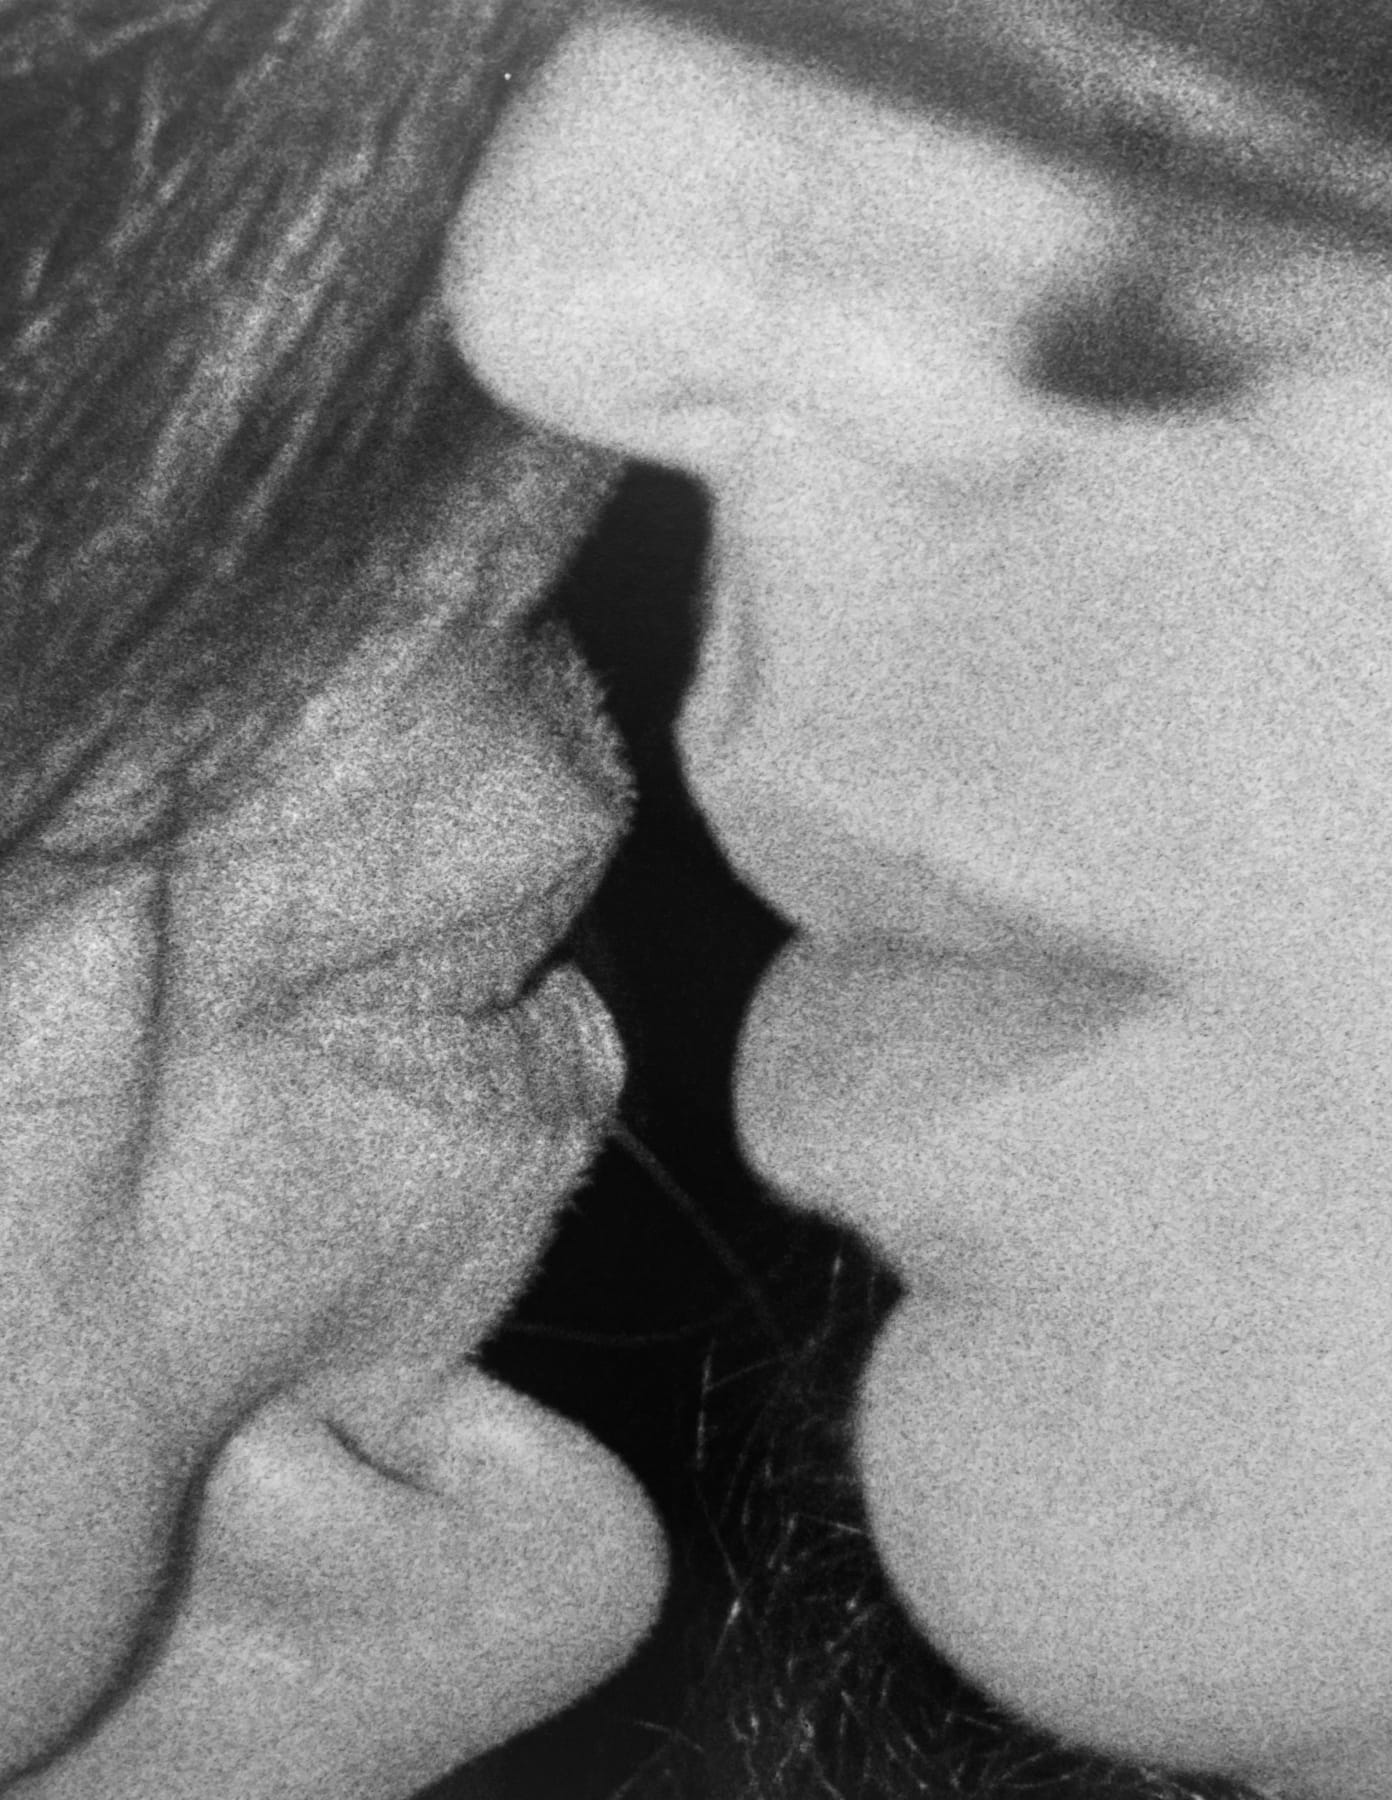 black and white photograph of two people about to kiss by Joanna Piotrowska